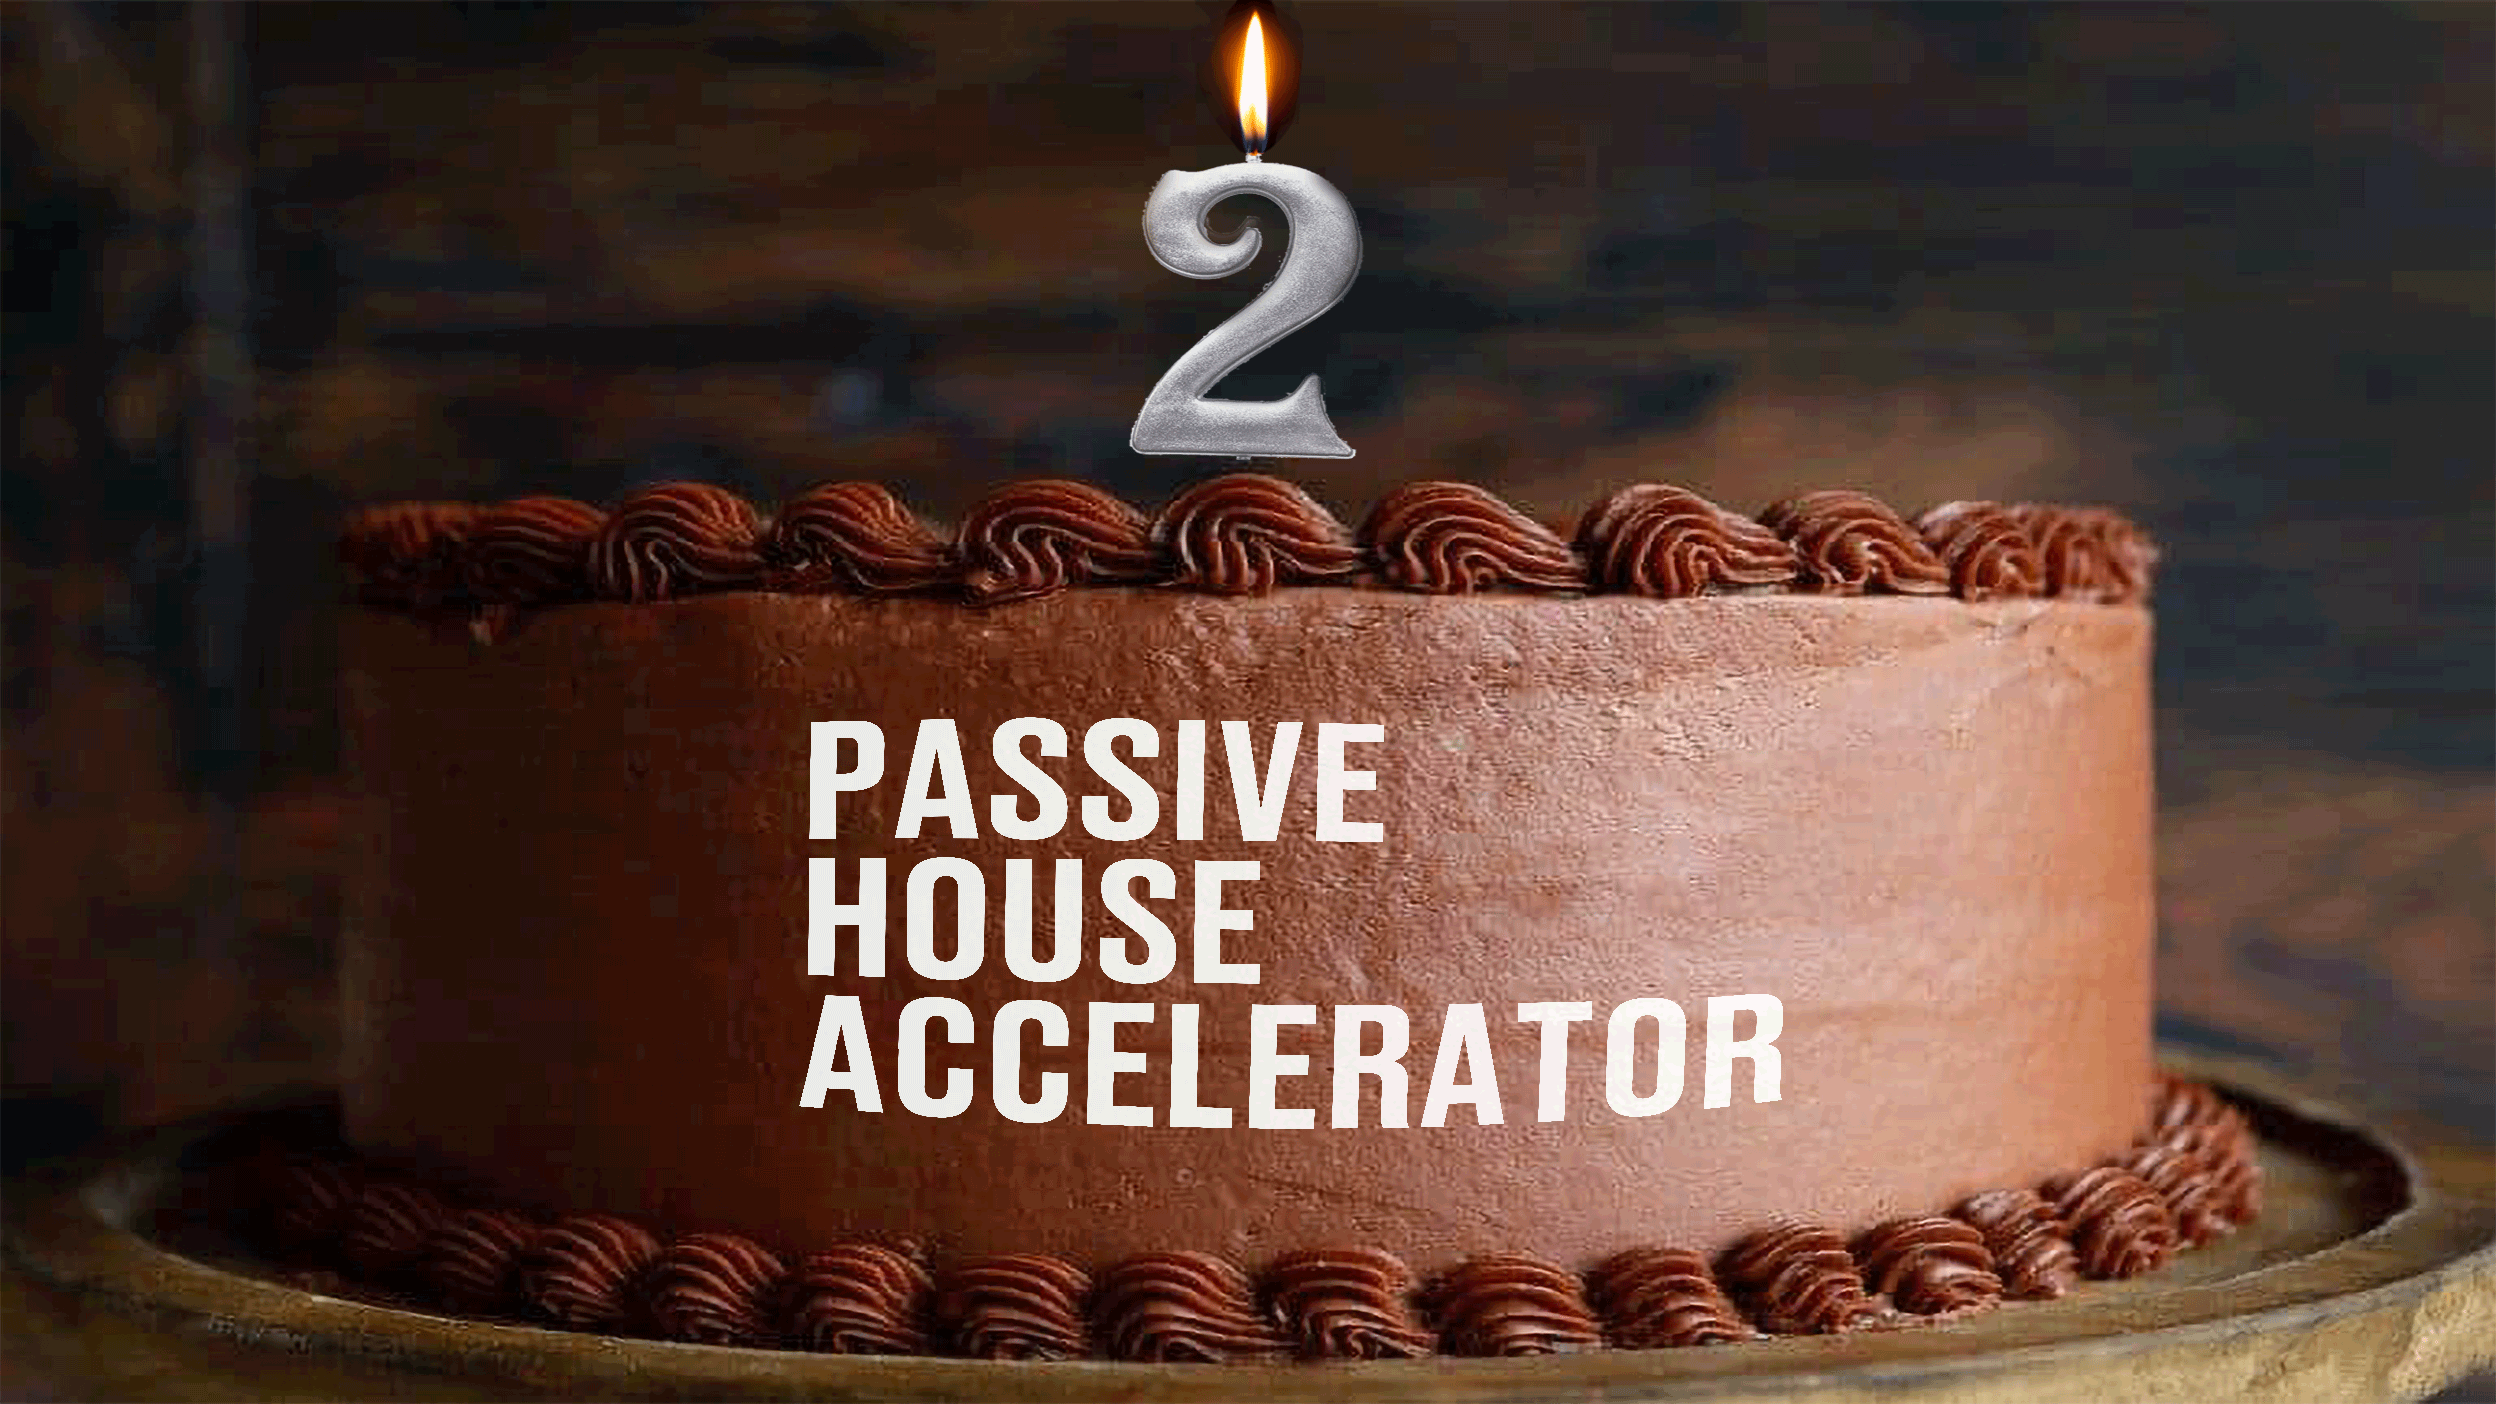 Two Years in at Passive House Accelerator, by Zack Semke and Michael Ingui